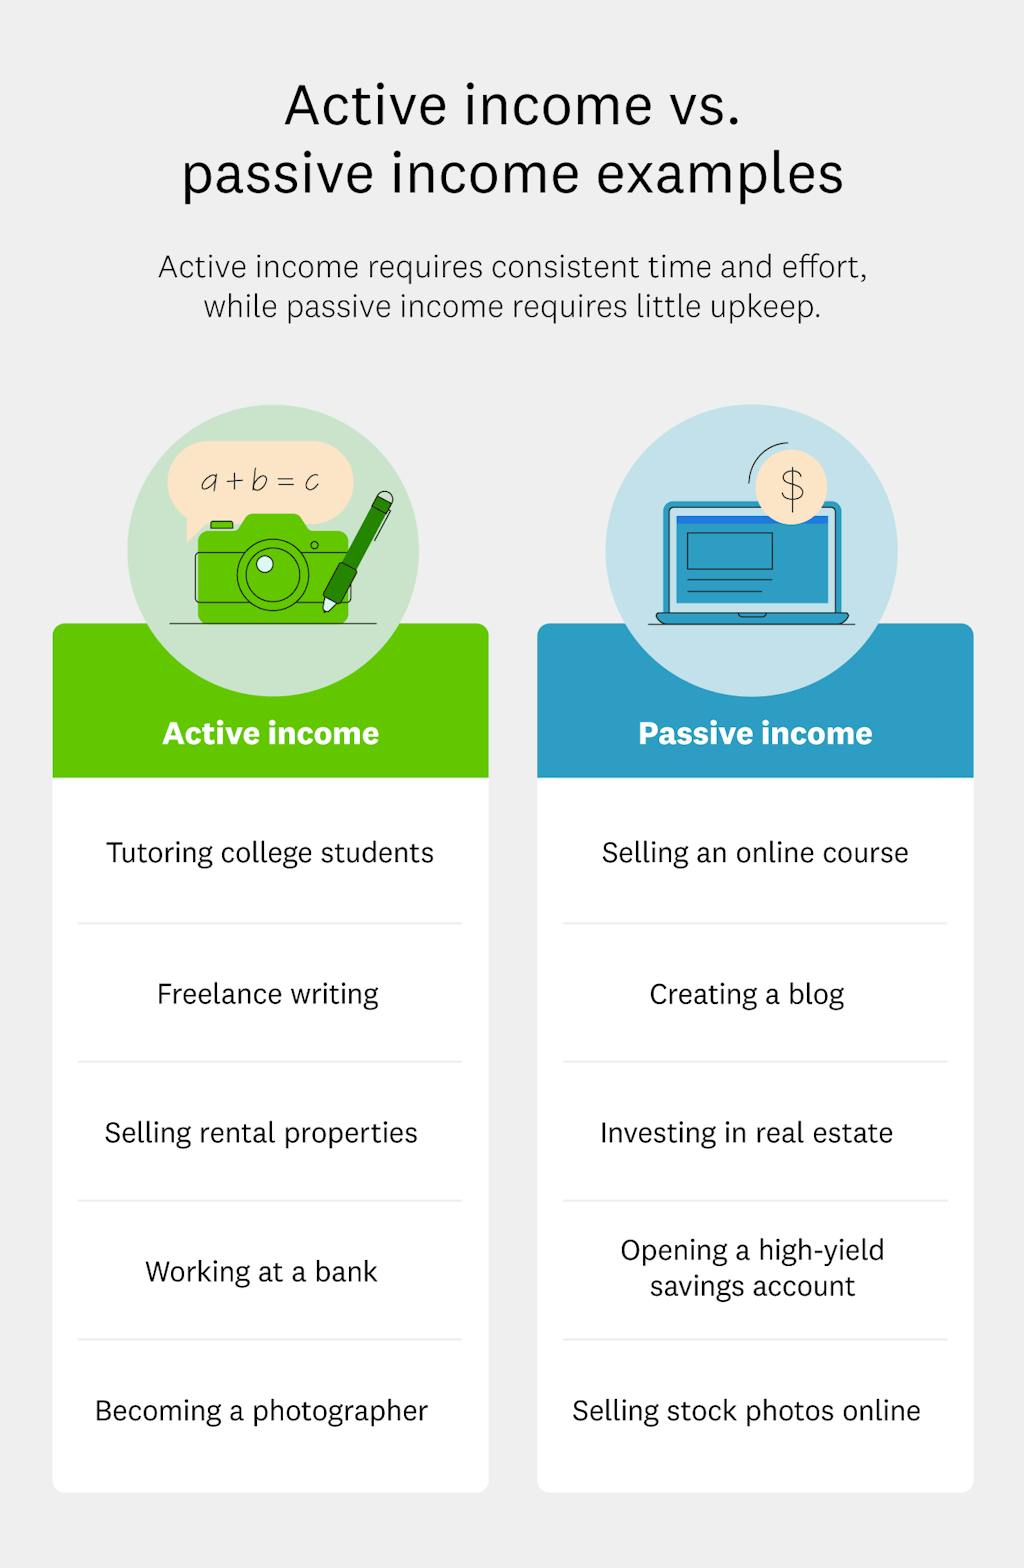 Become a Lender and make passive income by renting out your